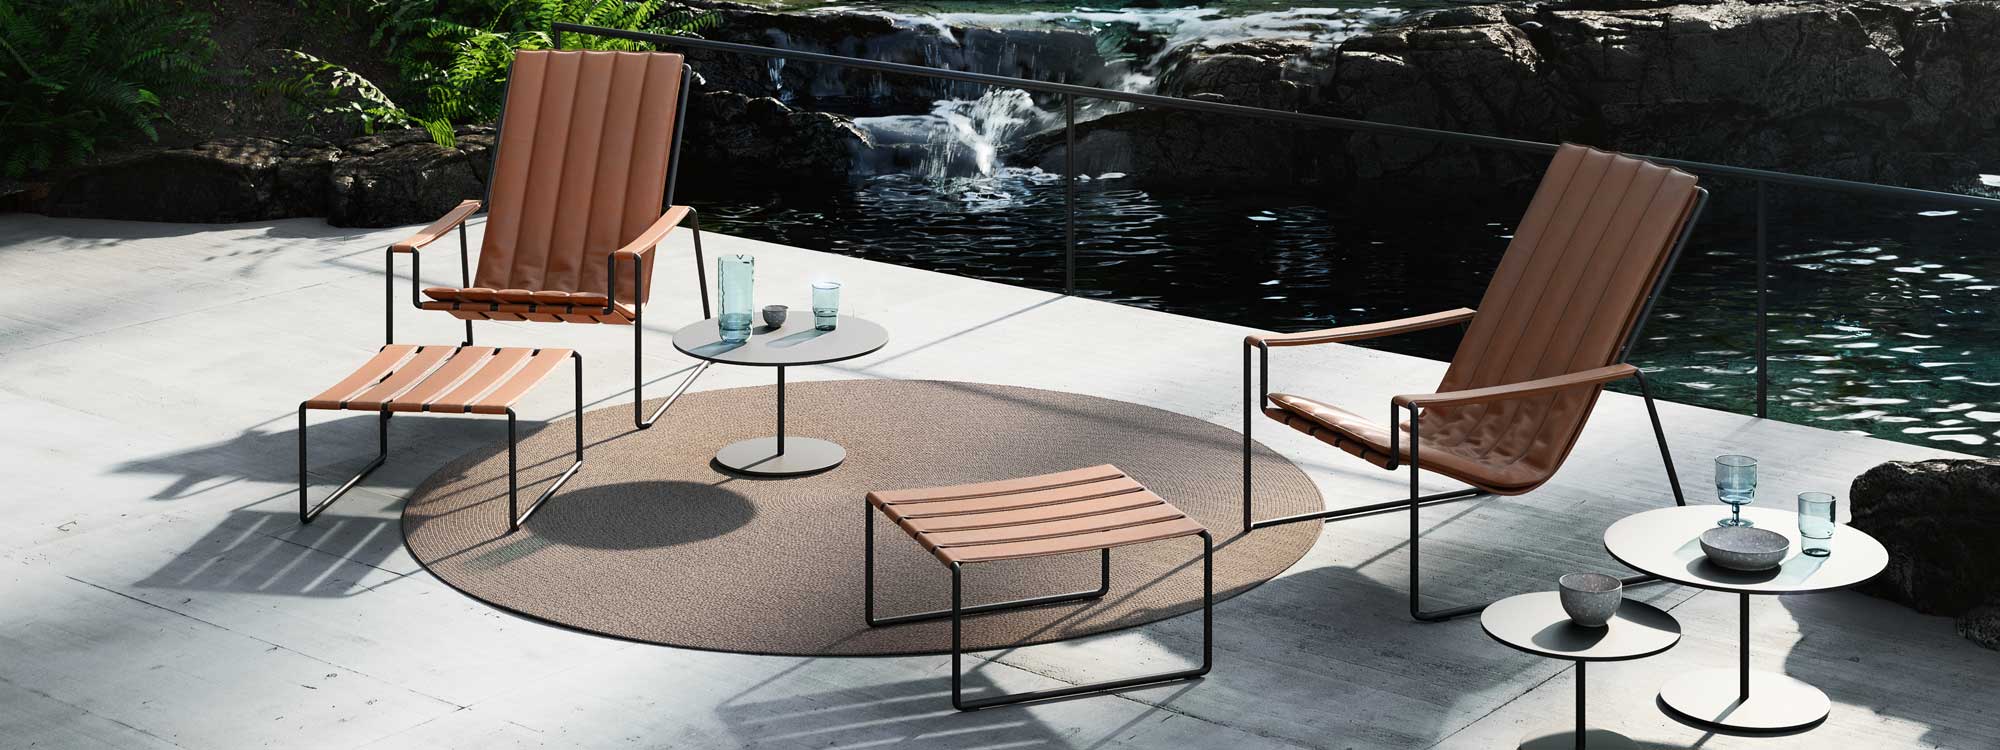 Image of Royal Botania Butler garden low tables & Strappy easy chairs on poured concrete terrace with tranquil water feature in the background